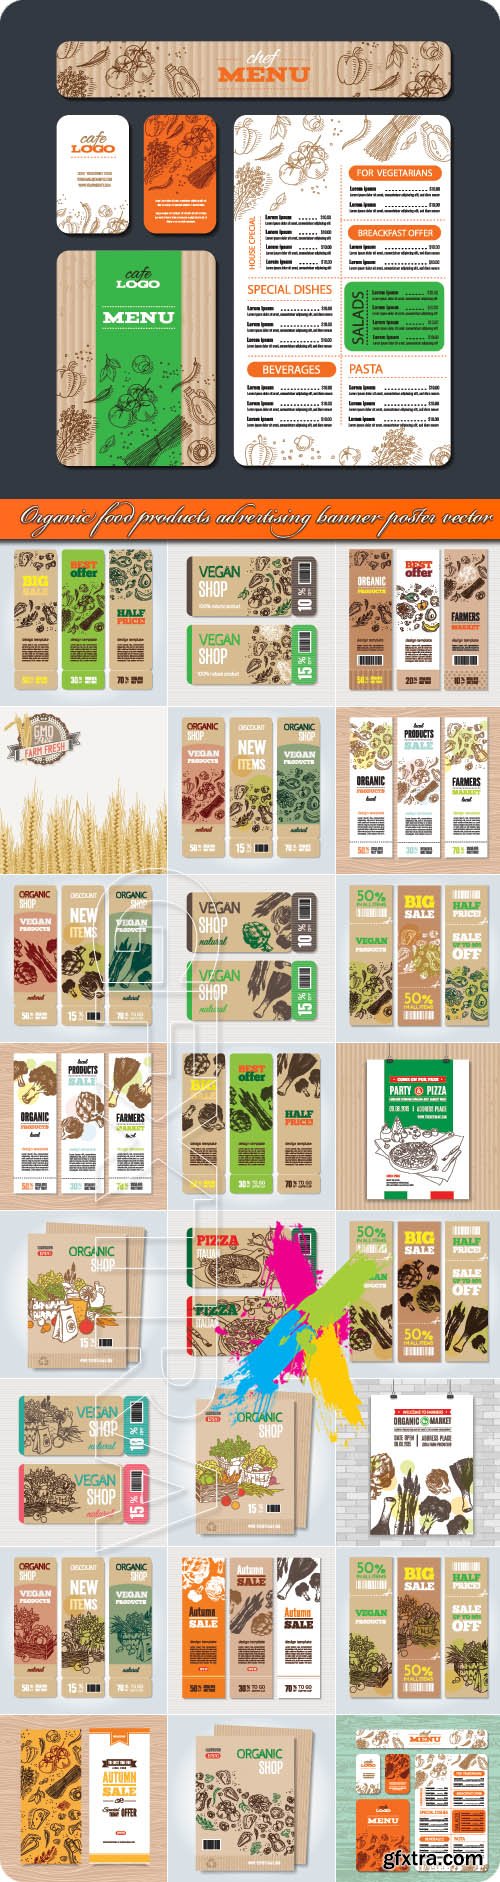 Organic food products advertising banner poster vector